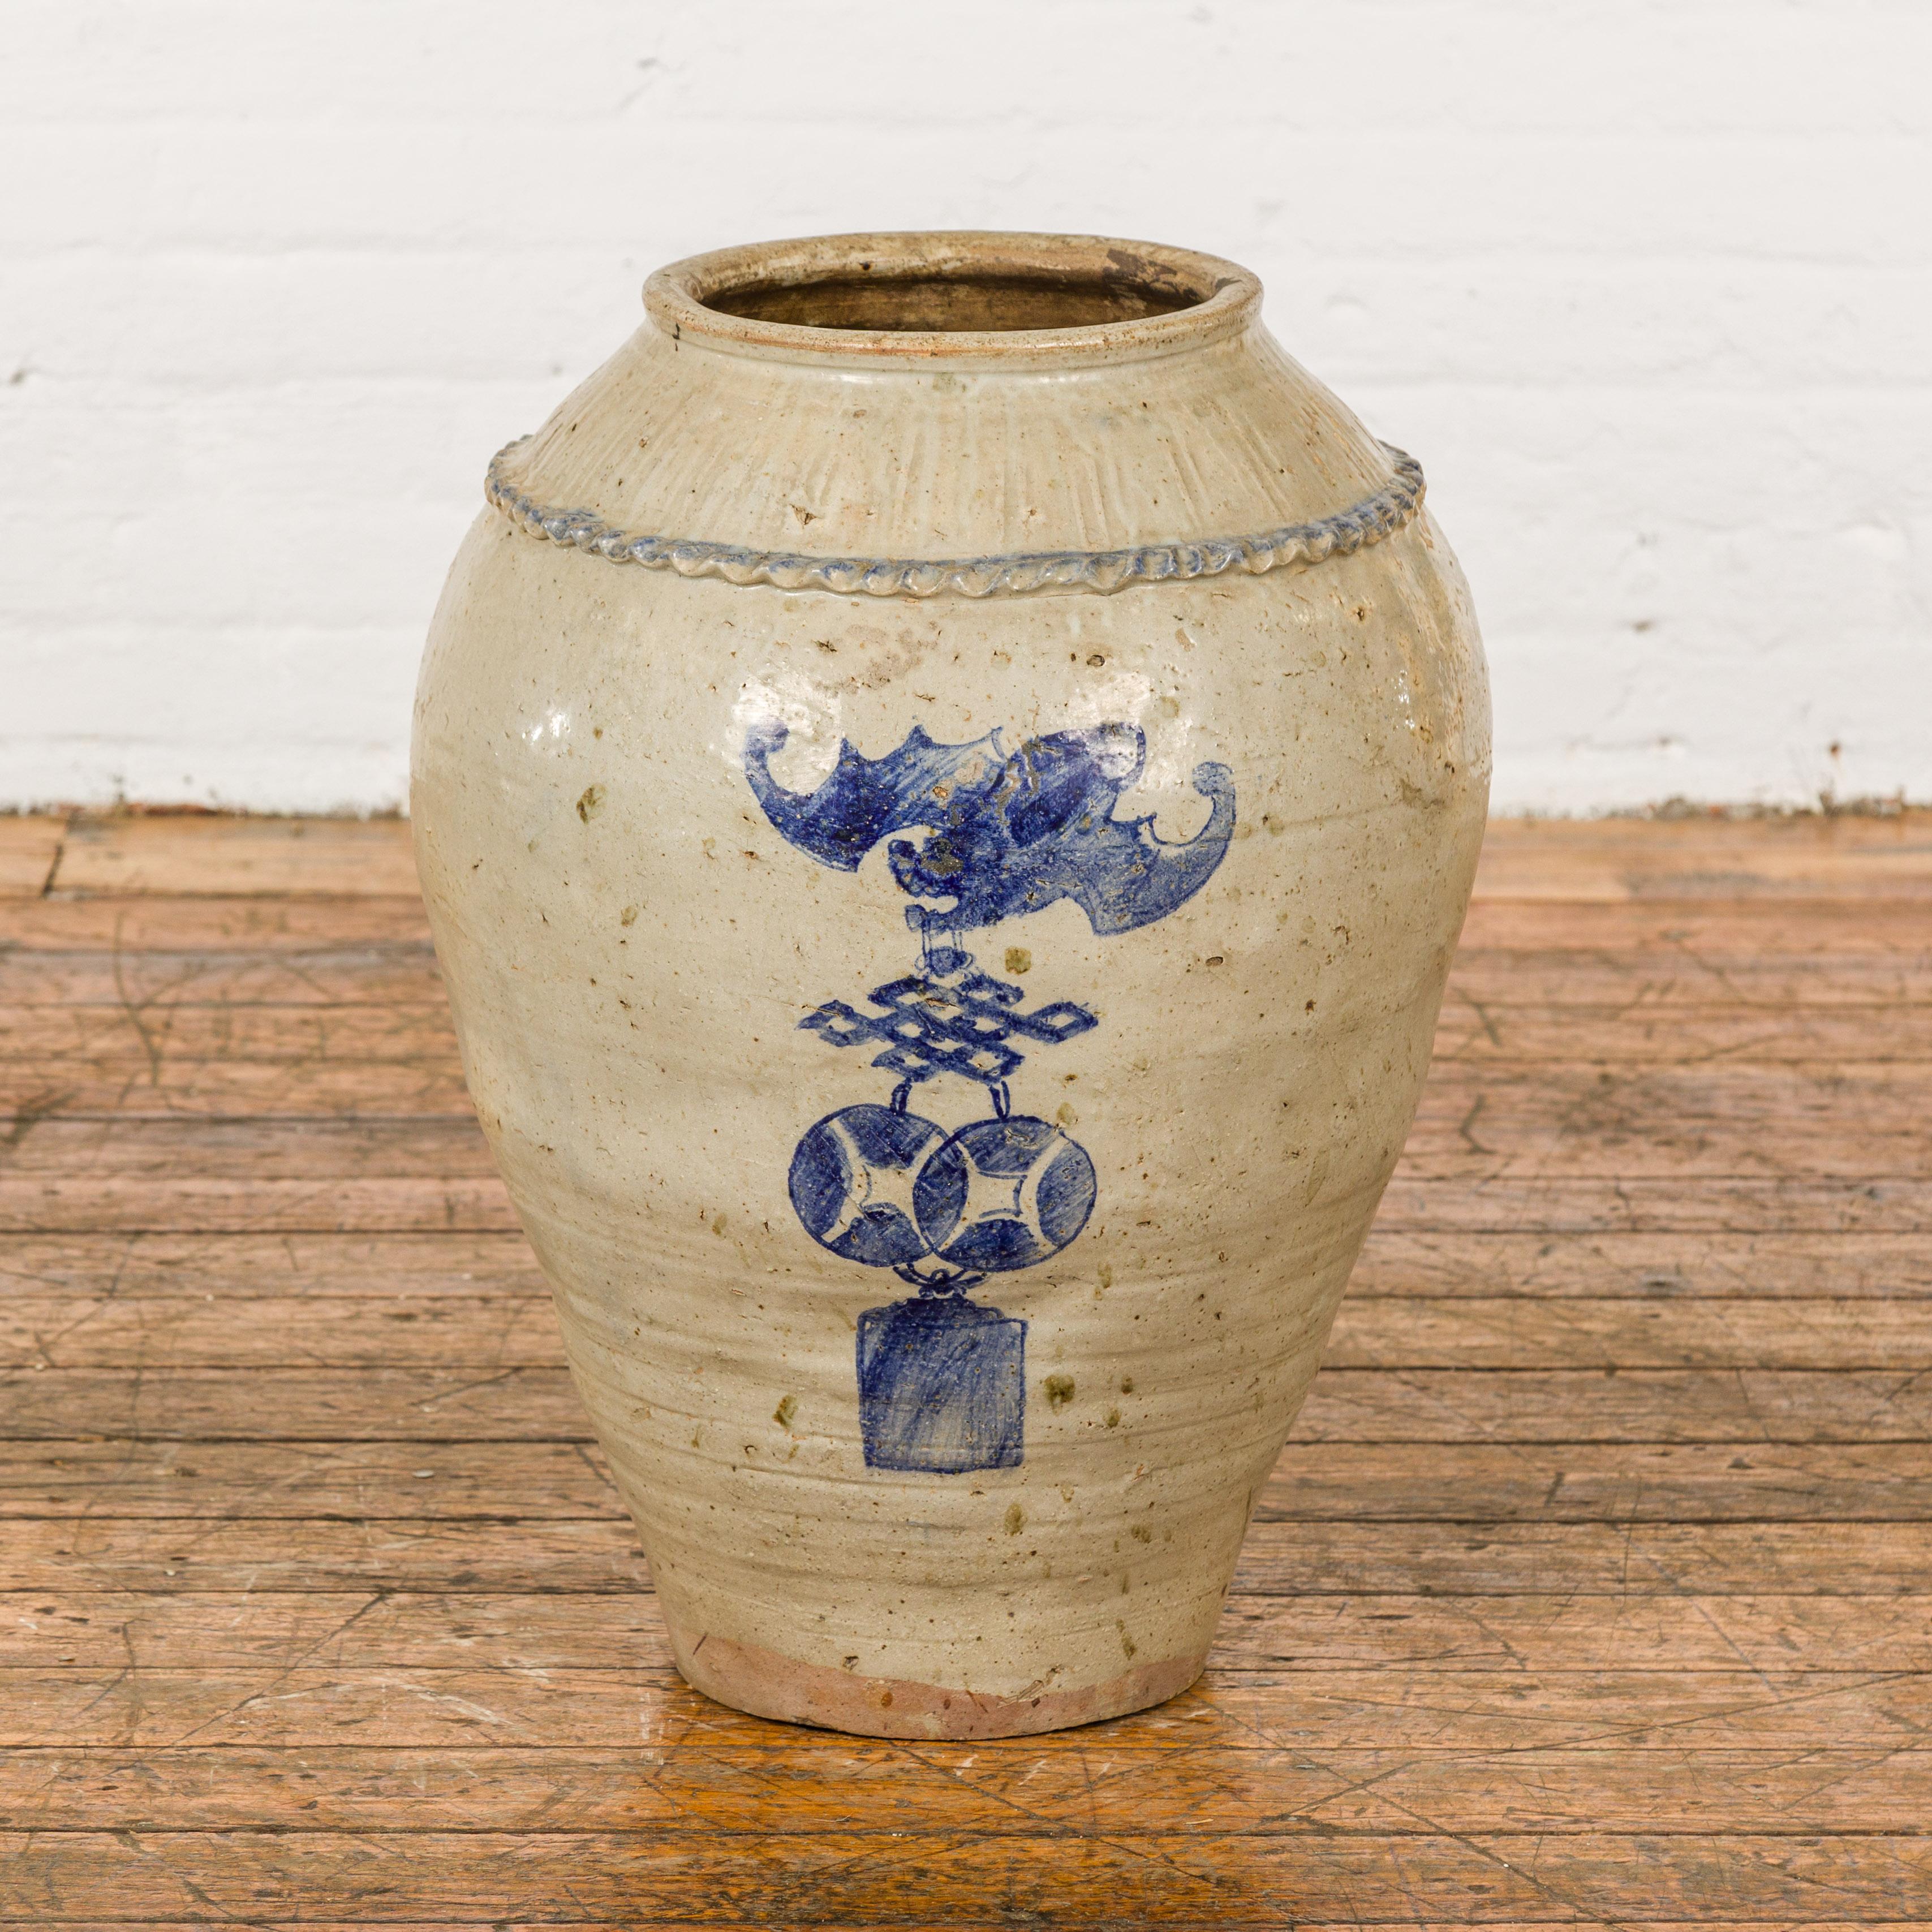 19th Century Antique Chinese Glazed Ceramic Storage Jar with Blue Painted Motifs For Sale